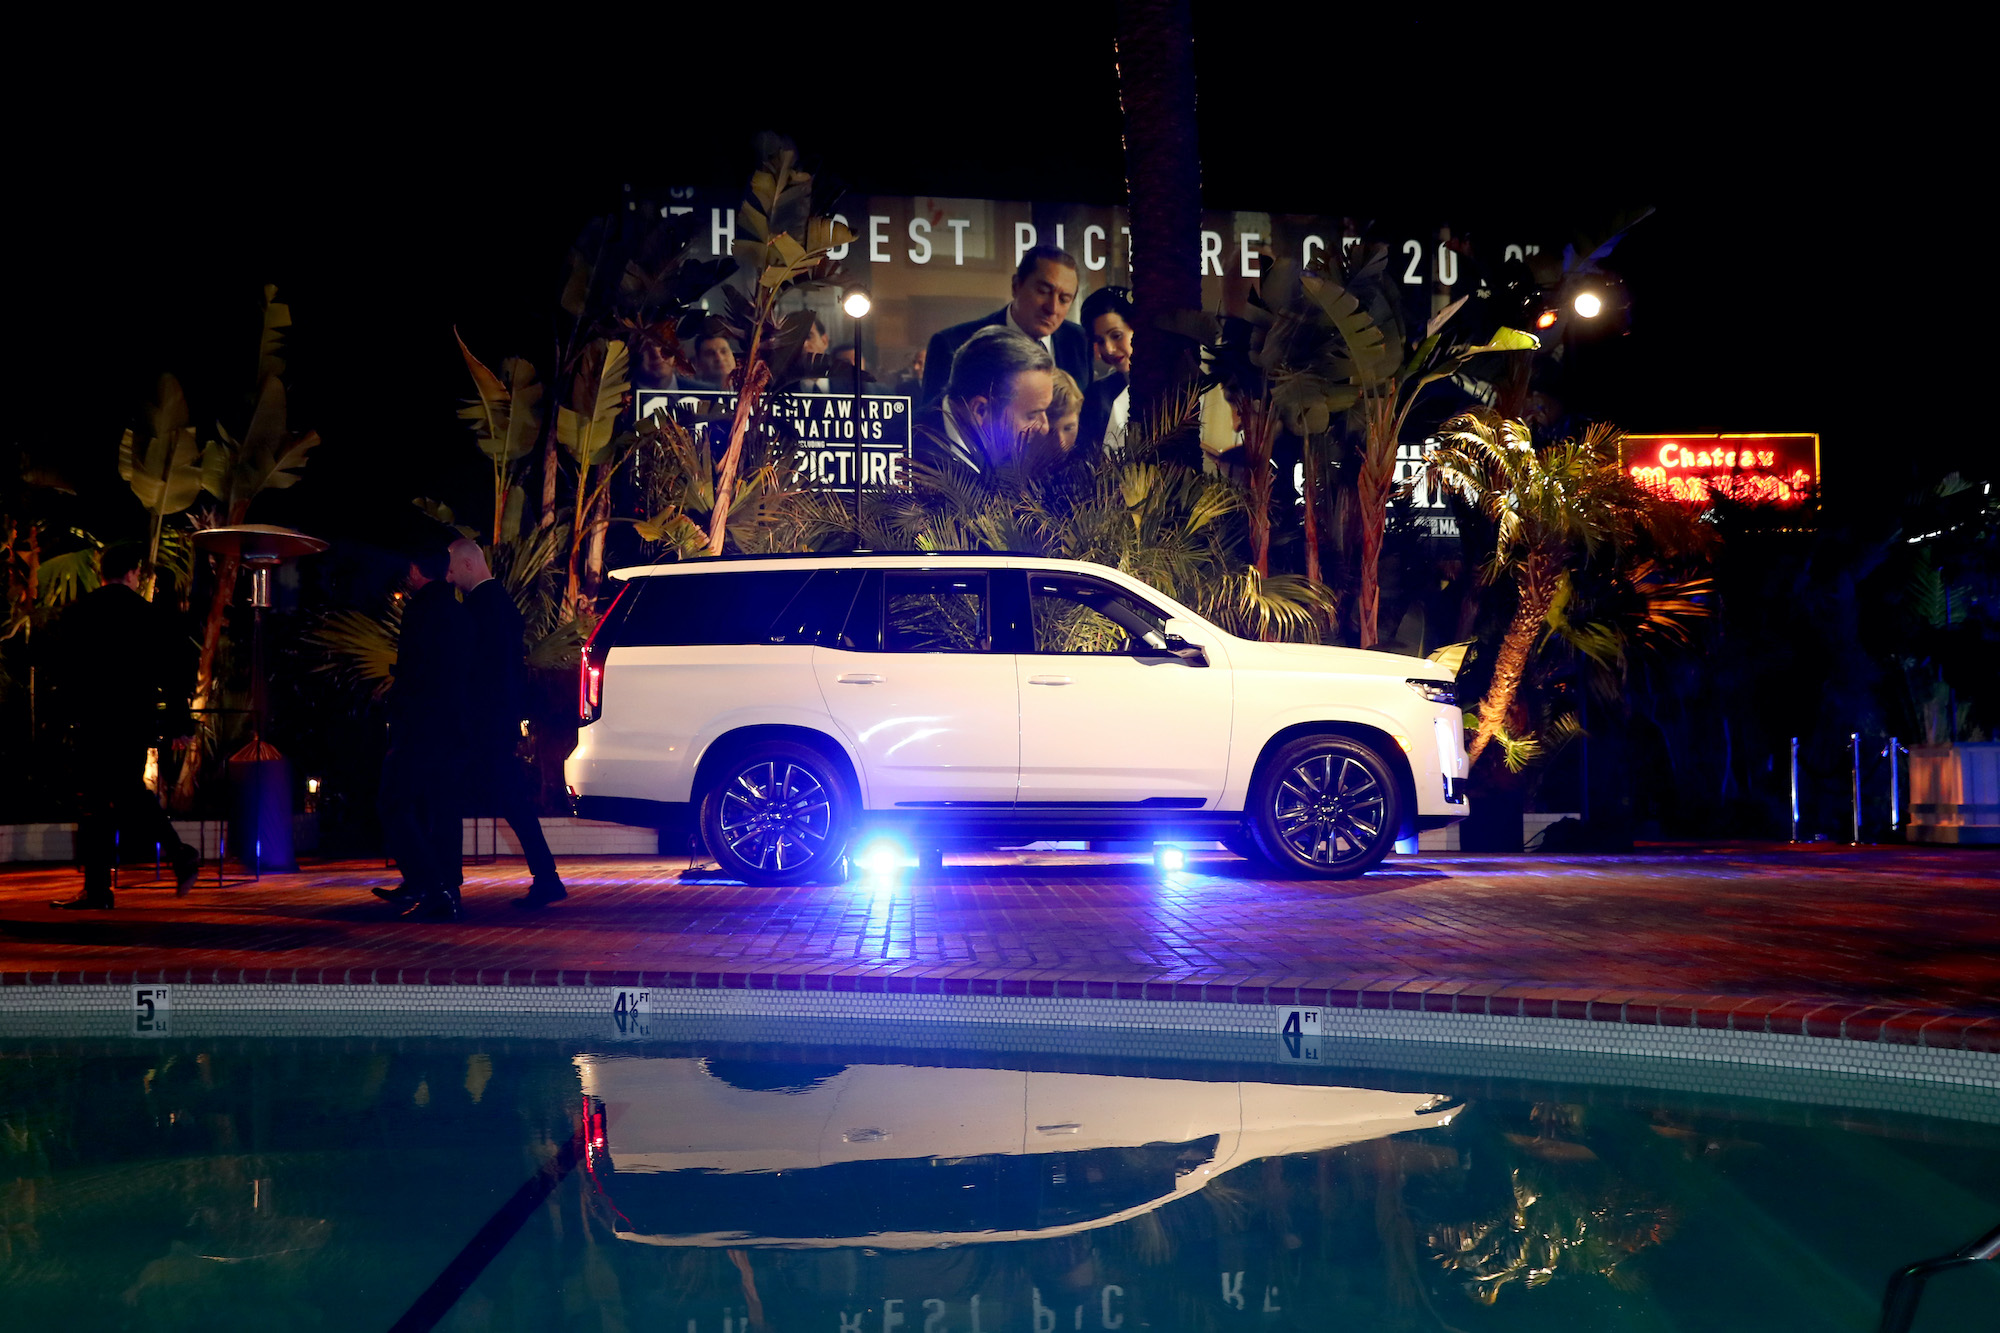 The all-new 2021 Cadillac Escalade is displayed during the Cadillac Oscar Week Celebration